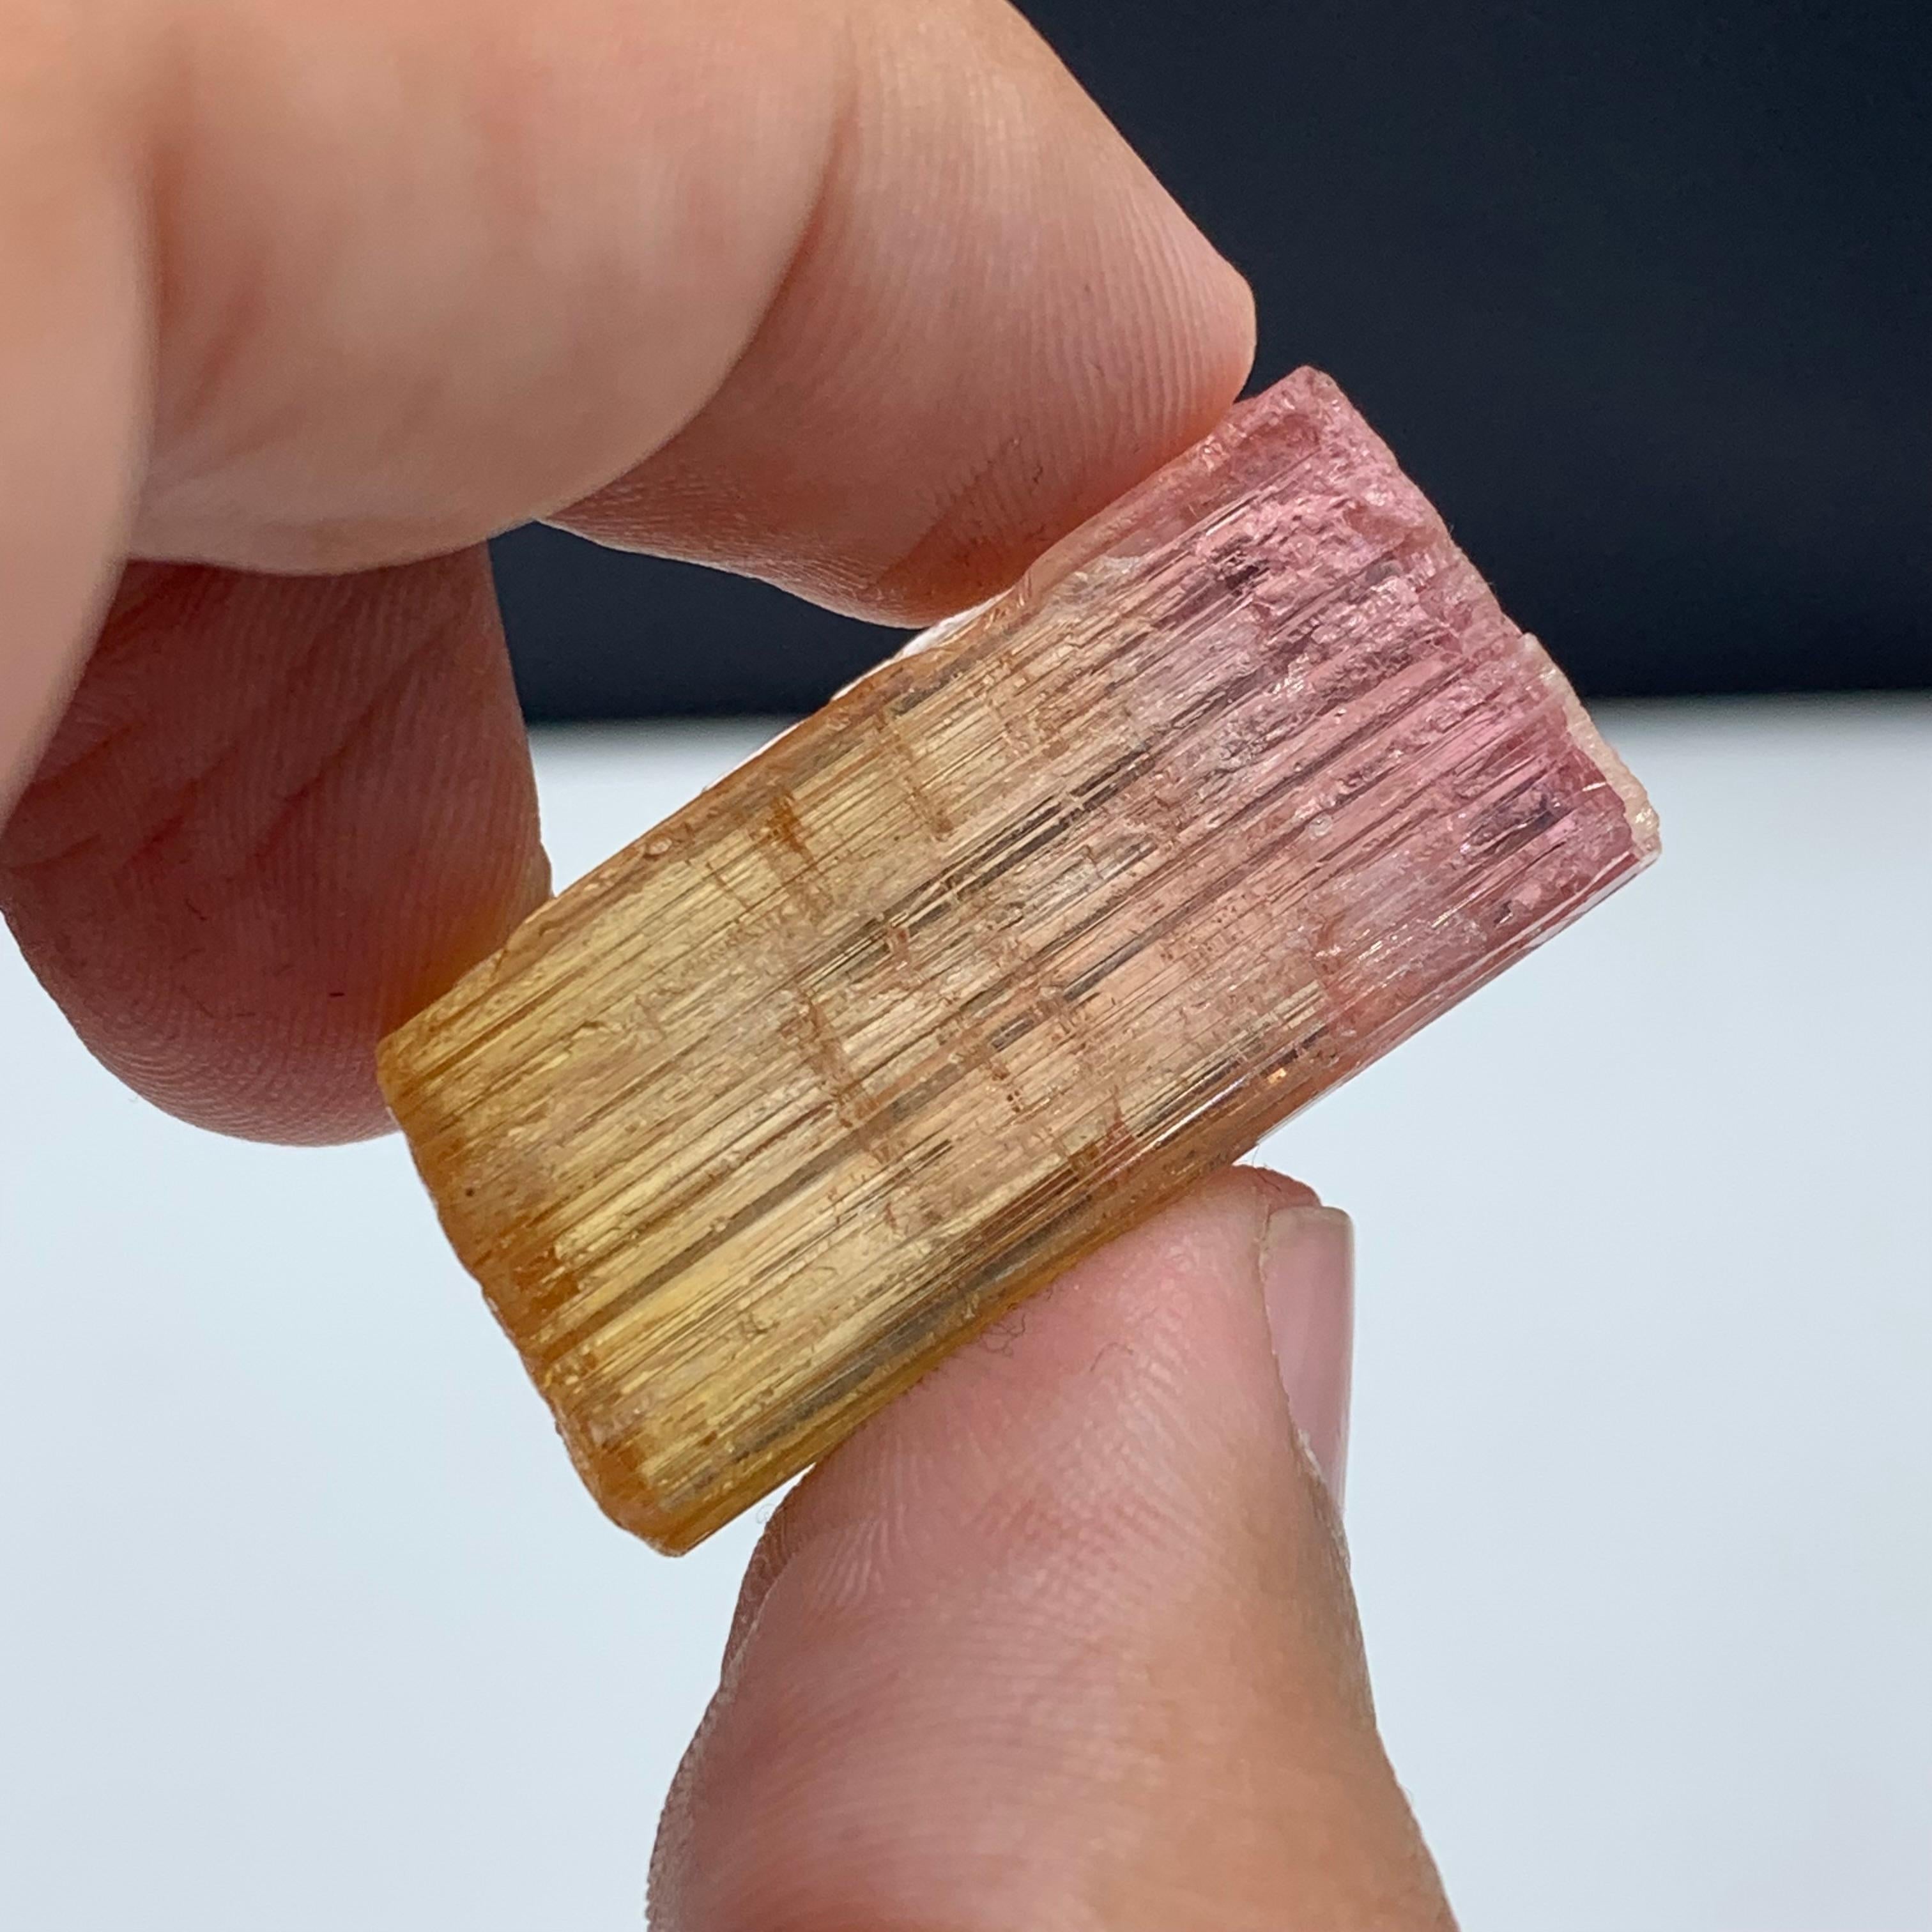 48 Carat Amazing Bi Color Tourmaline Crystal From Paprook Mine, Afghanistan For Sale 2